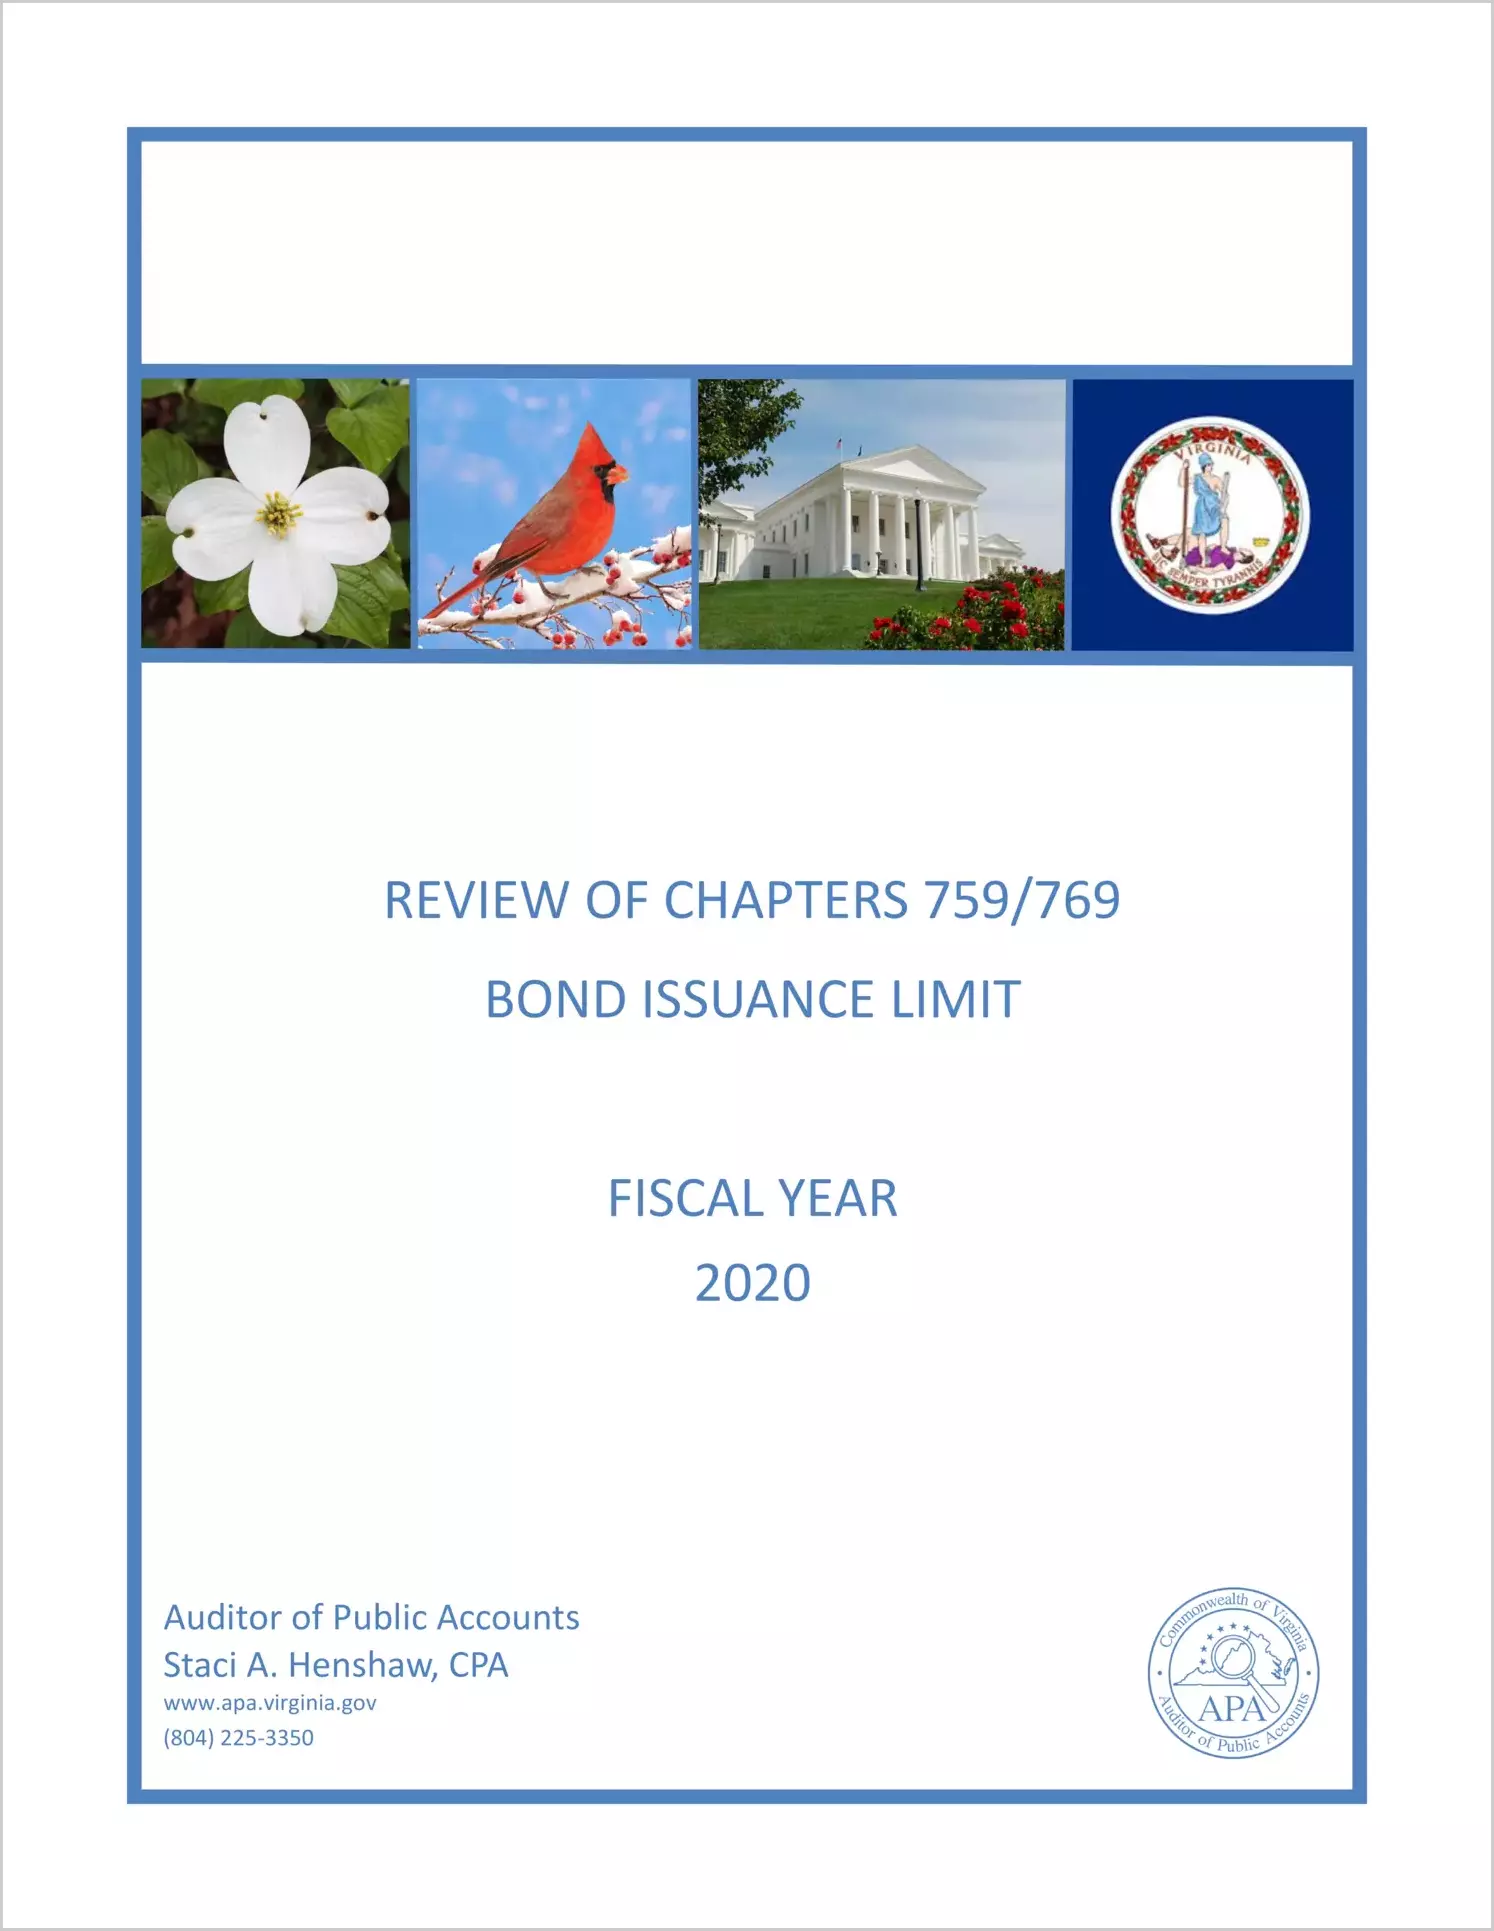 Review of Chapters 759/769 Bond Issuance Limit Fiscal Year 2020